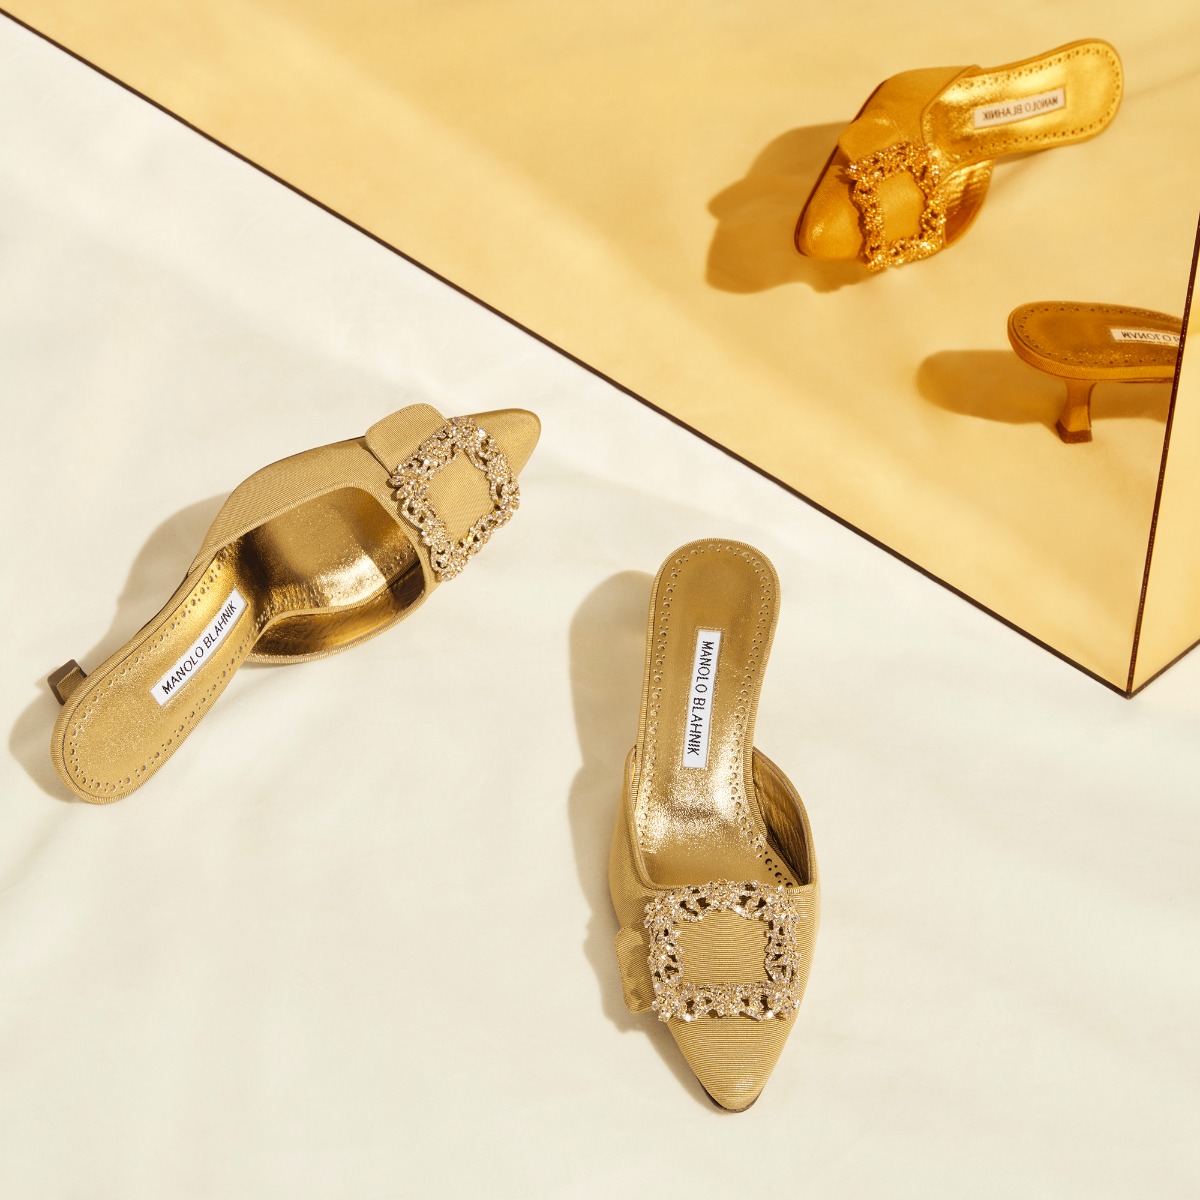 Editorial image of the gold edition Maysale mules, reflected in a mirrored gold box.